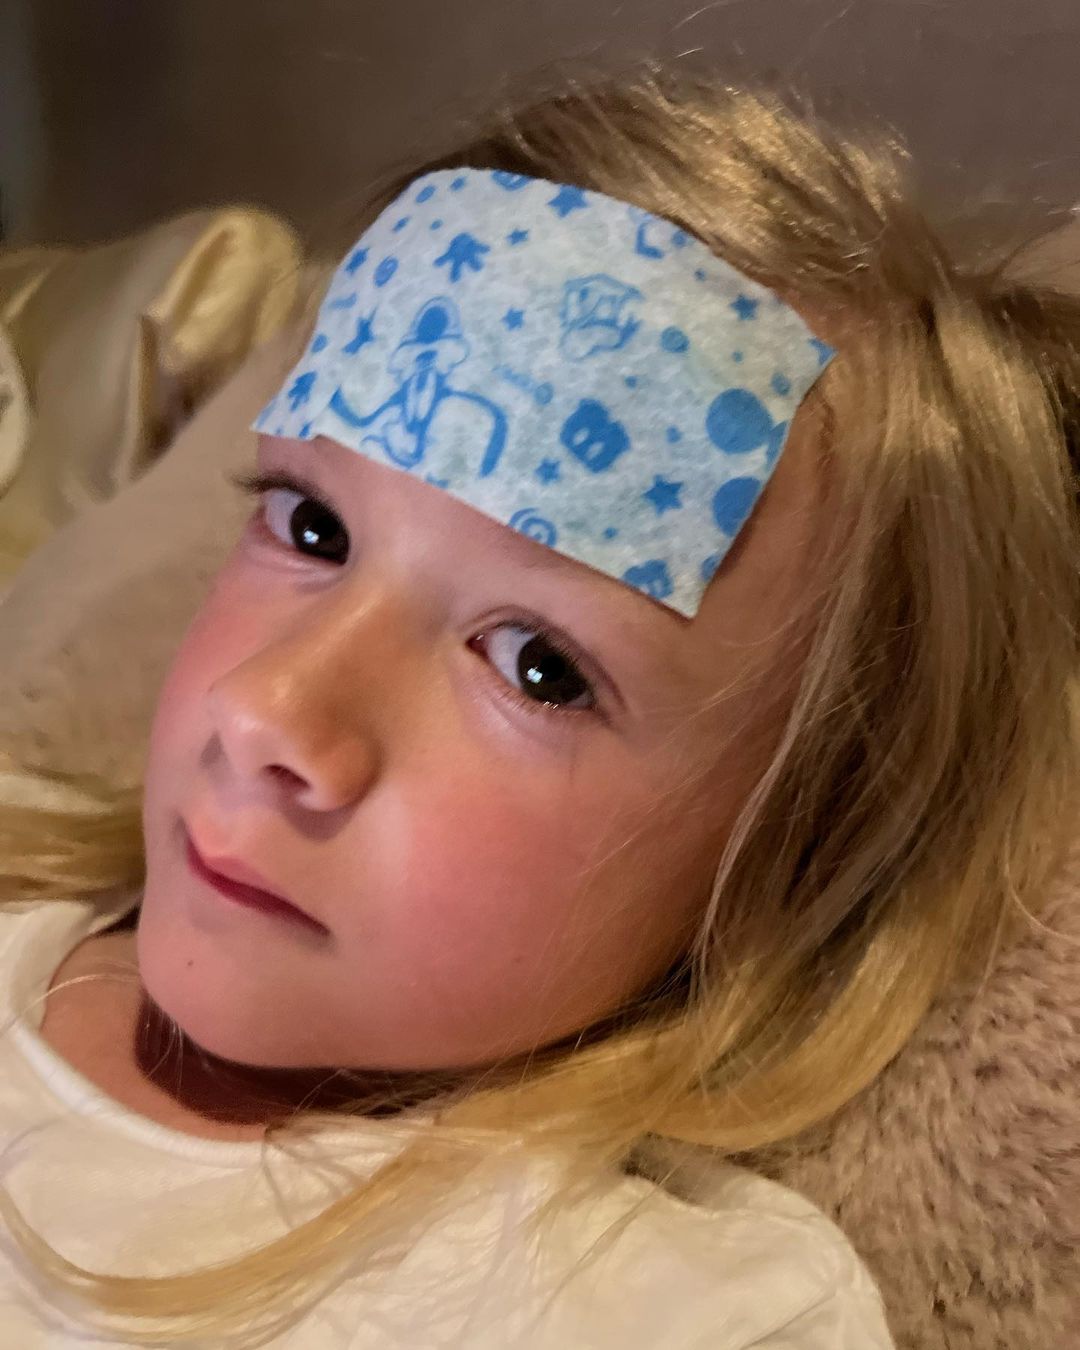 Tori Spelling's sick child after being exposed to mold, from an Instagram post dated May 11, 2023 | Source: Instagram/torispelling/